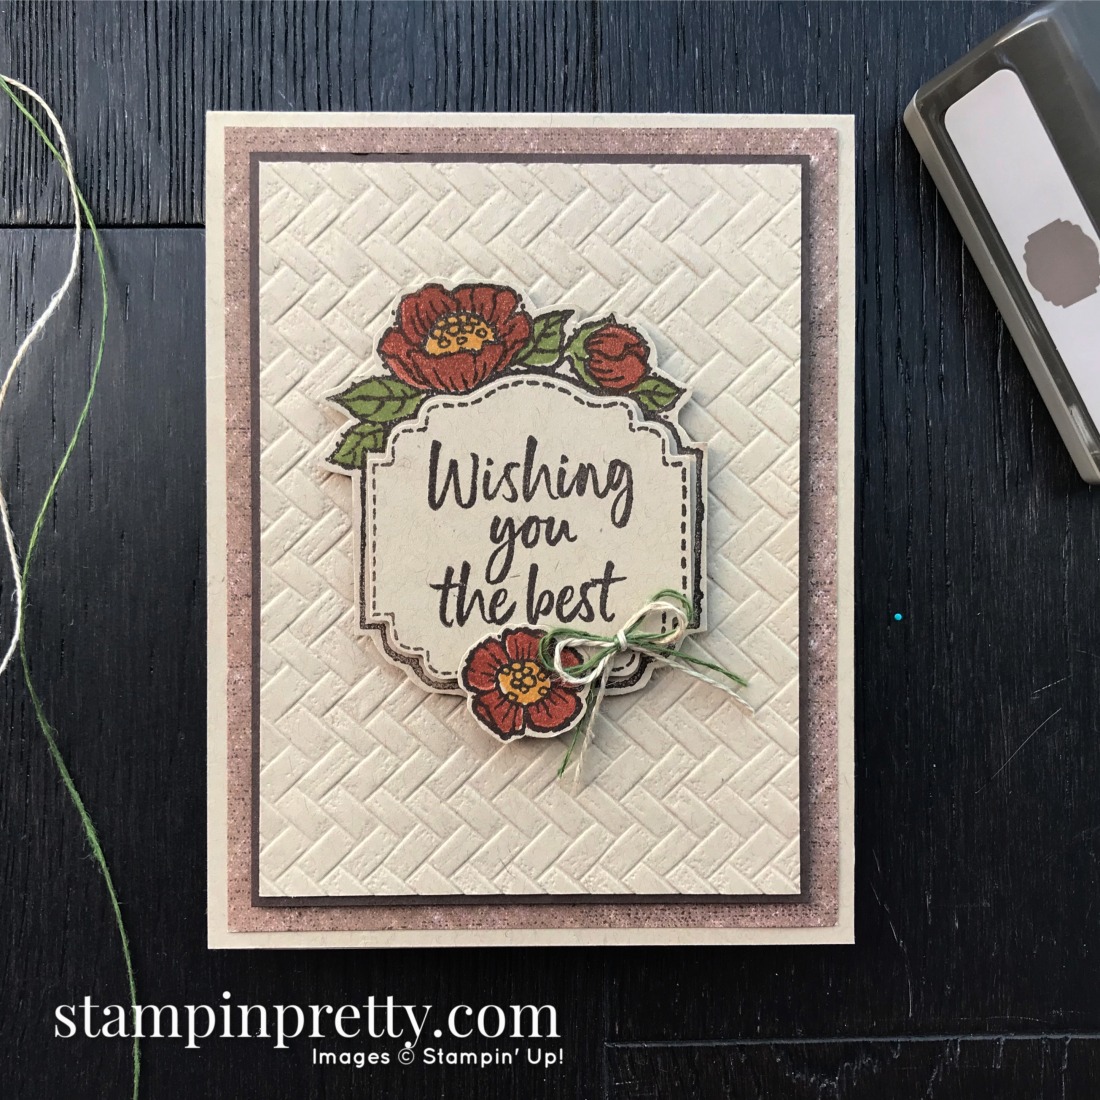 Tags in Bloom by Stampin' Up! Sneak Peek Wishing You the Best Card by Mary Fish, Stampin' Pretty